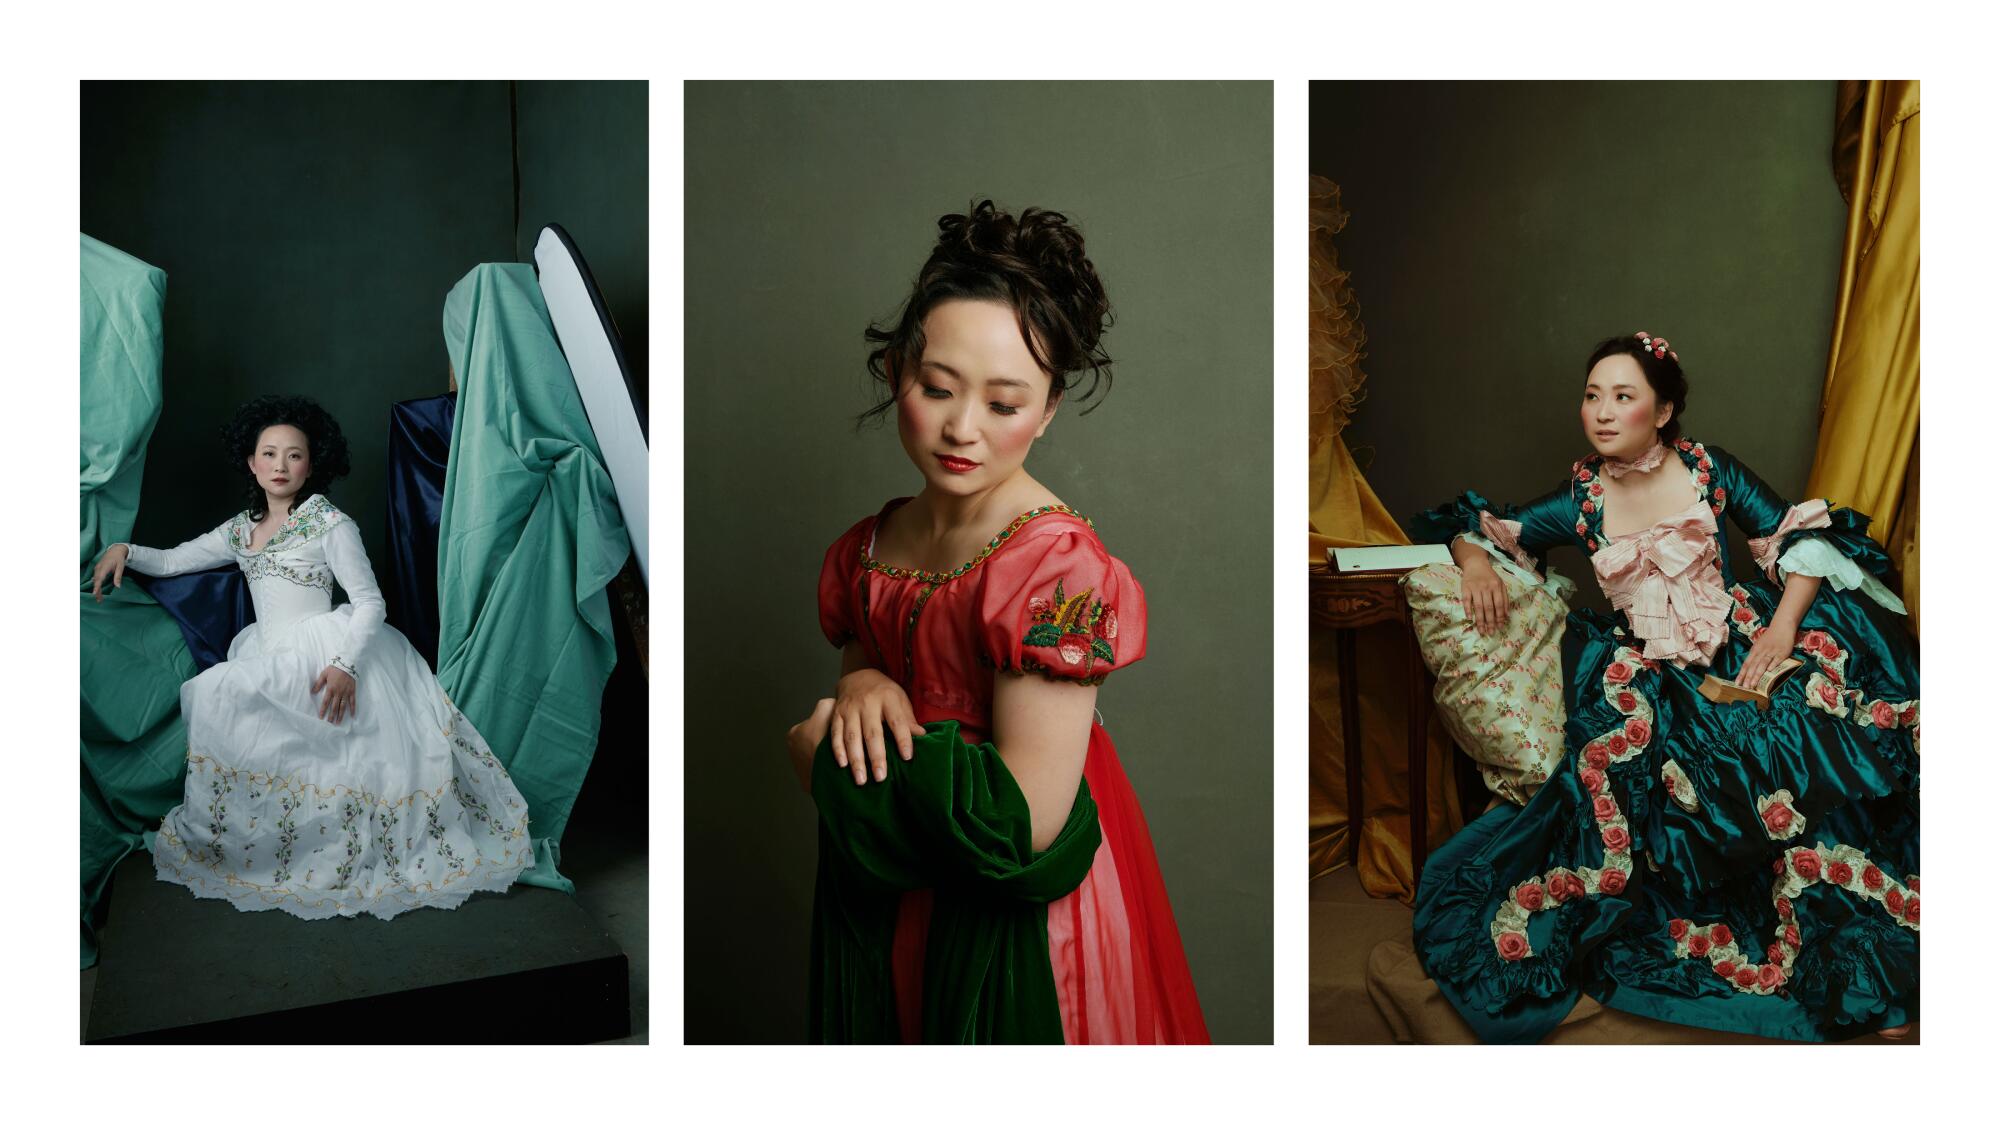 Three female models wear gowns inspired by 18th century portraits in photographs by Christina Millar.